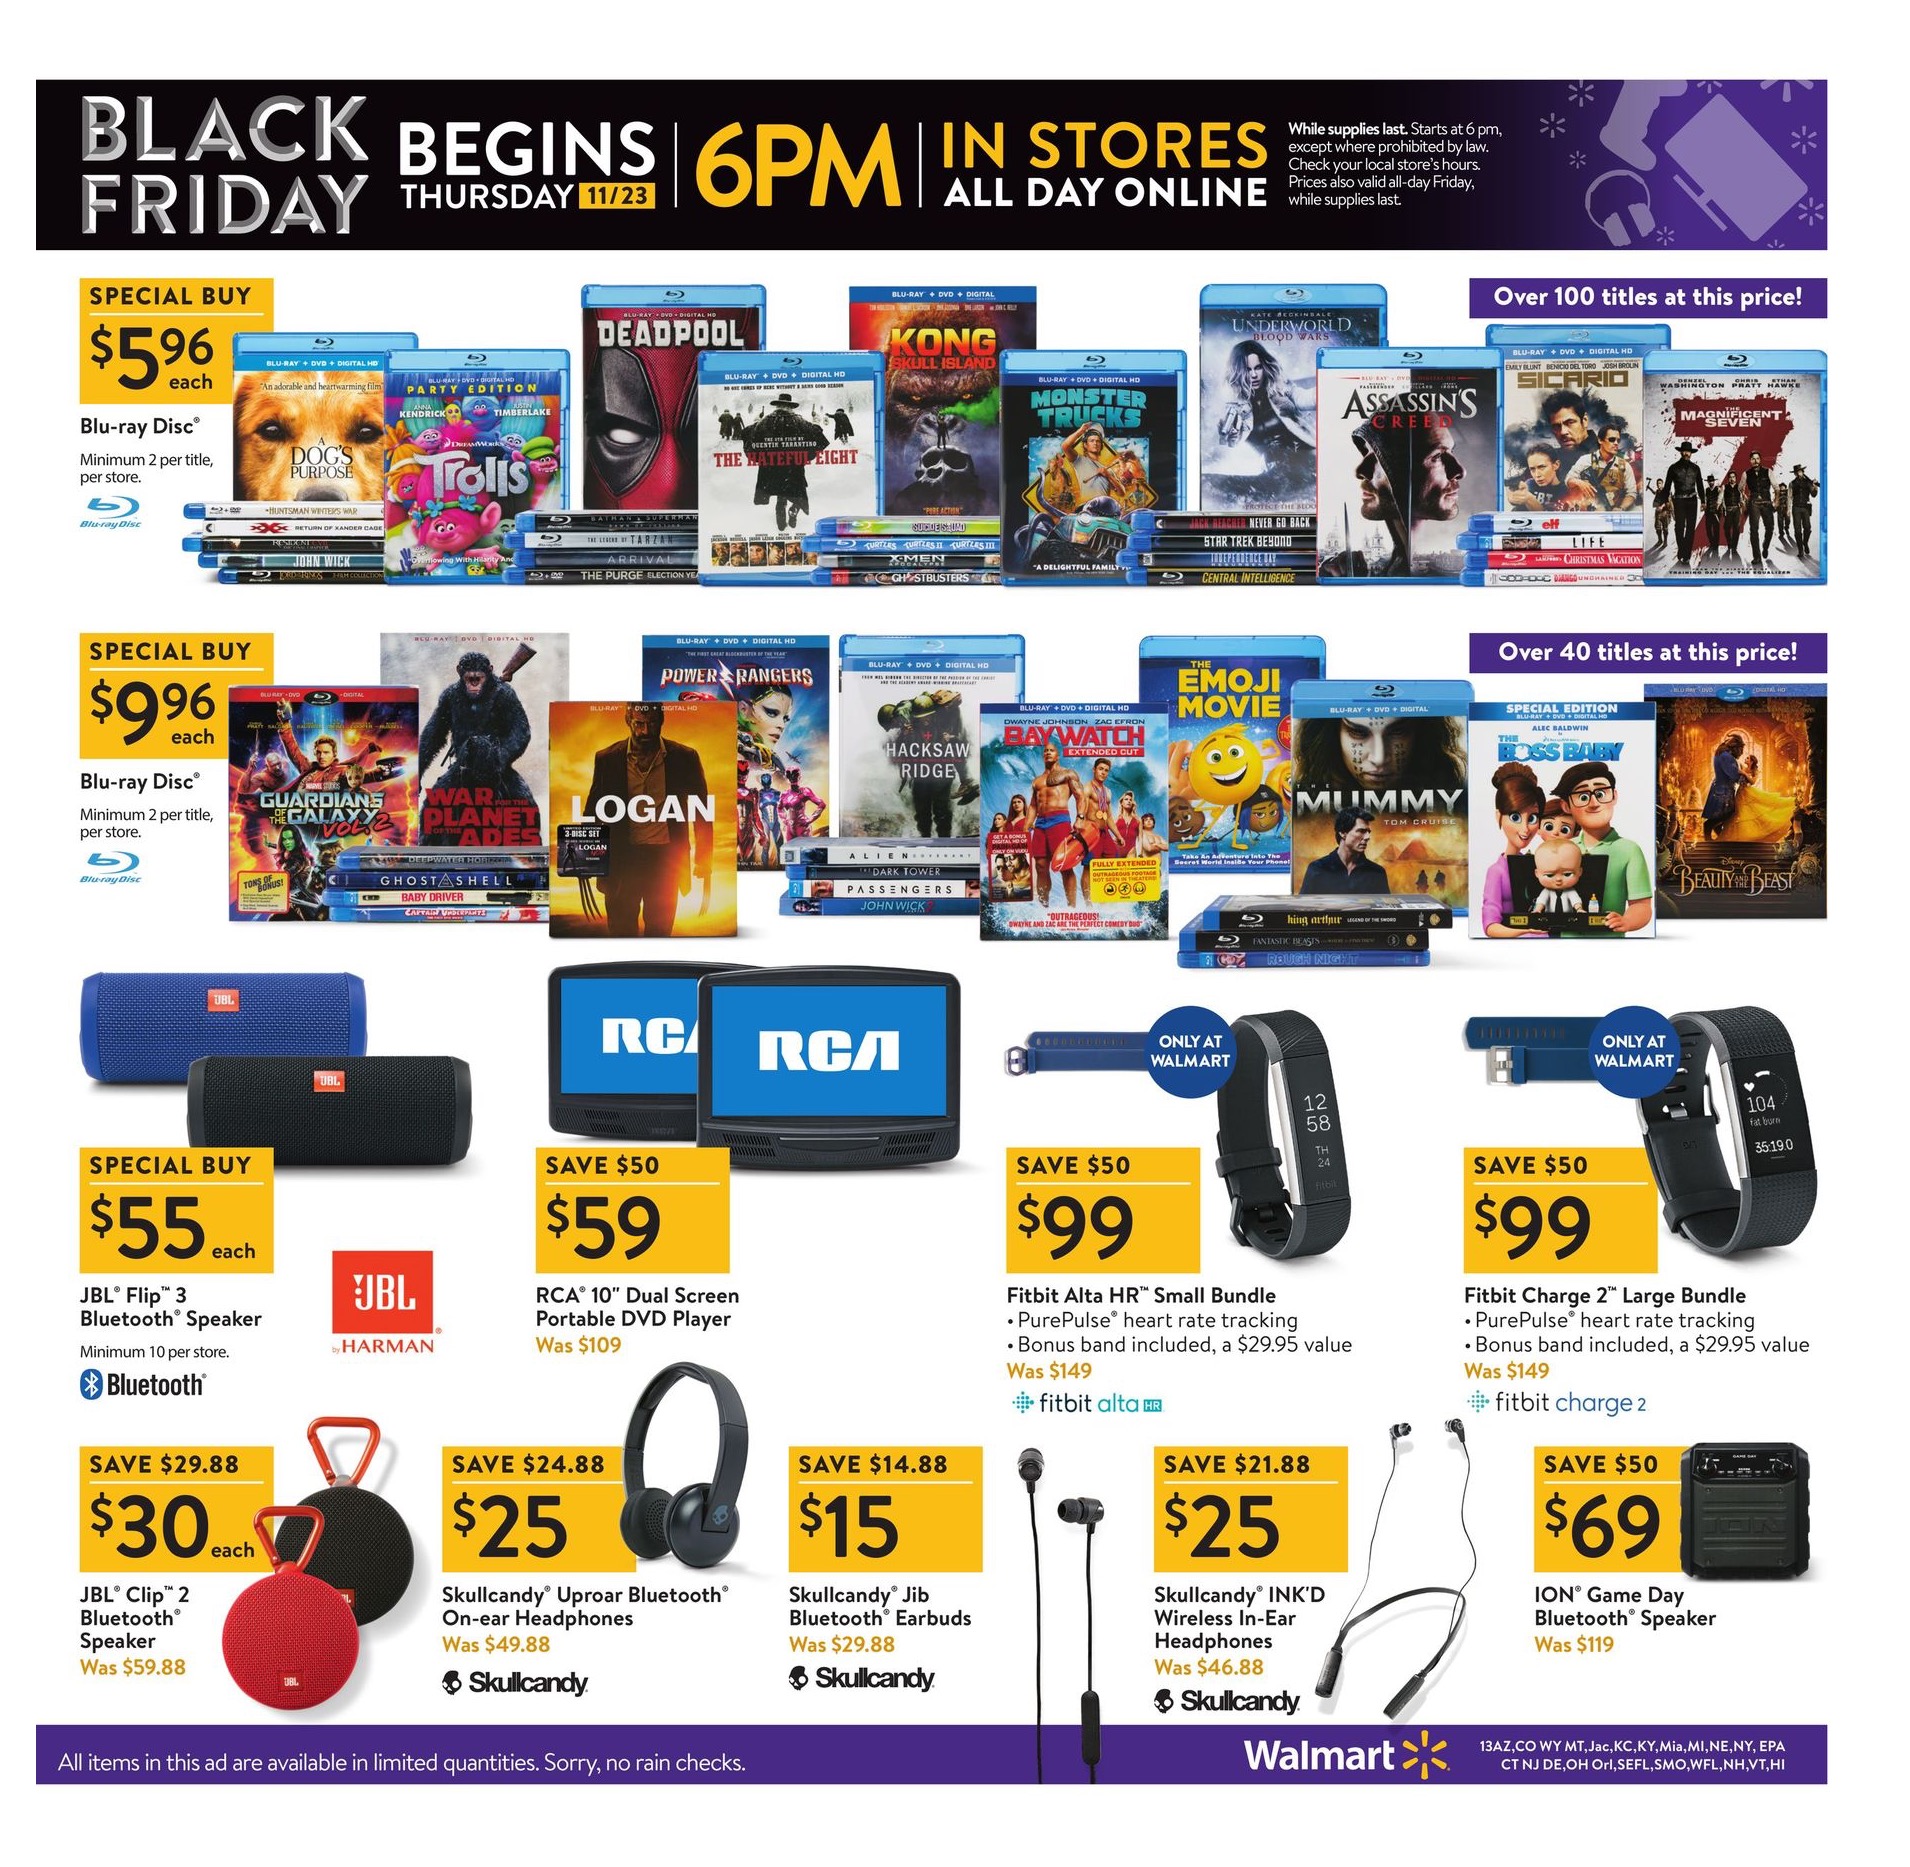 Here’s the full 36page Black Friday 2017 ad from Walmart BGR